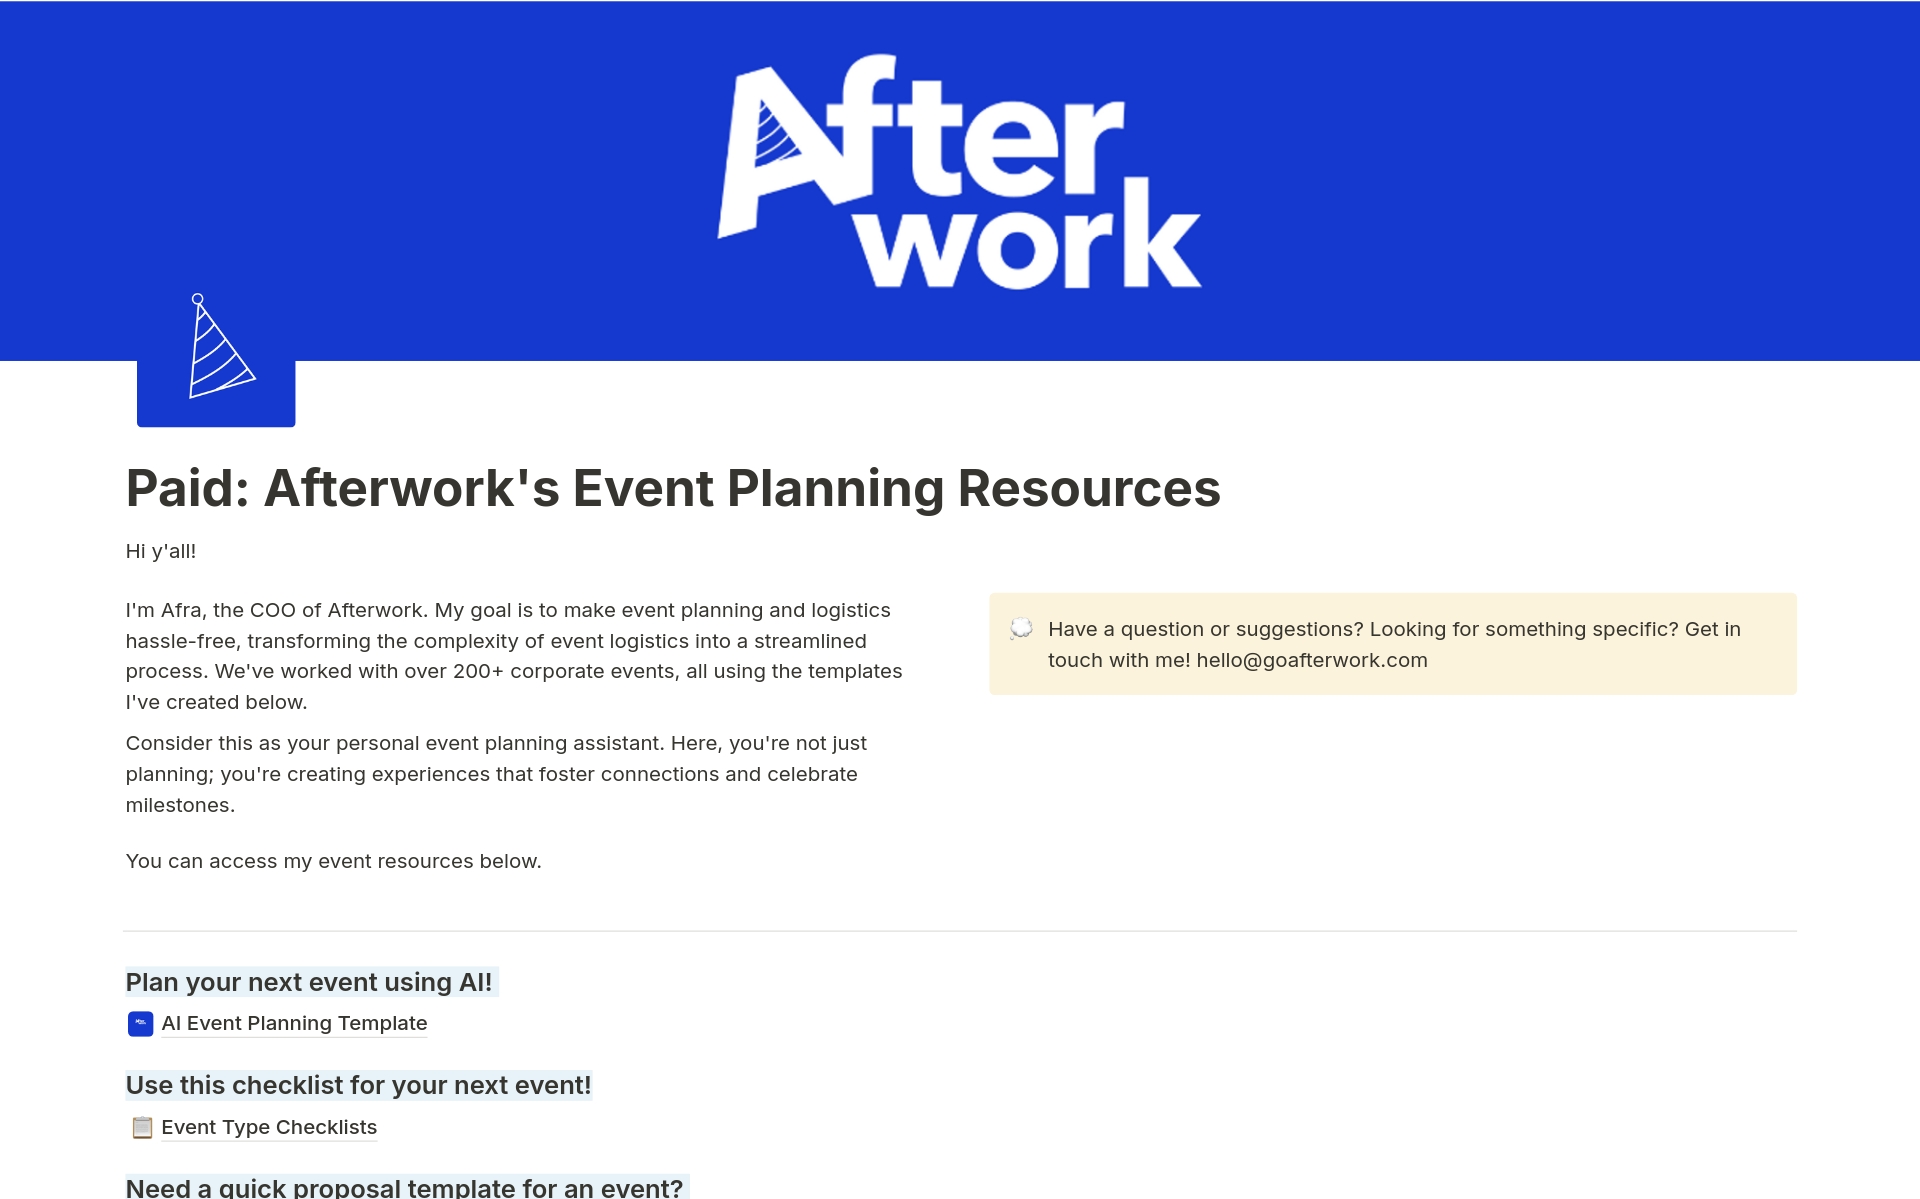 Make event planning easy! Transform the way you plan corporate events with our new AI Event Planning Template! Using AI, it'll speed up your process & keep everything organized when planning your next corporate event, team building event, happy hour and more!  